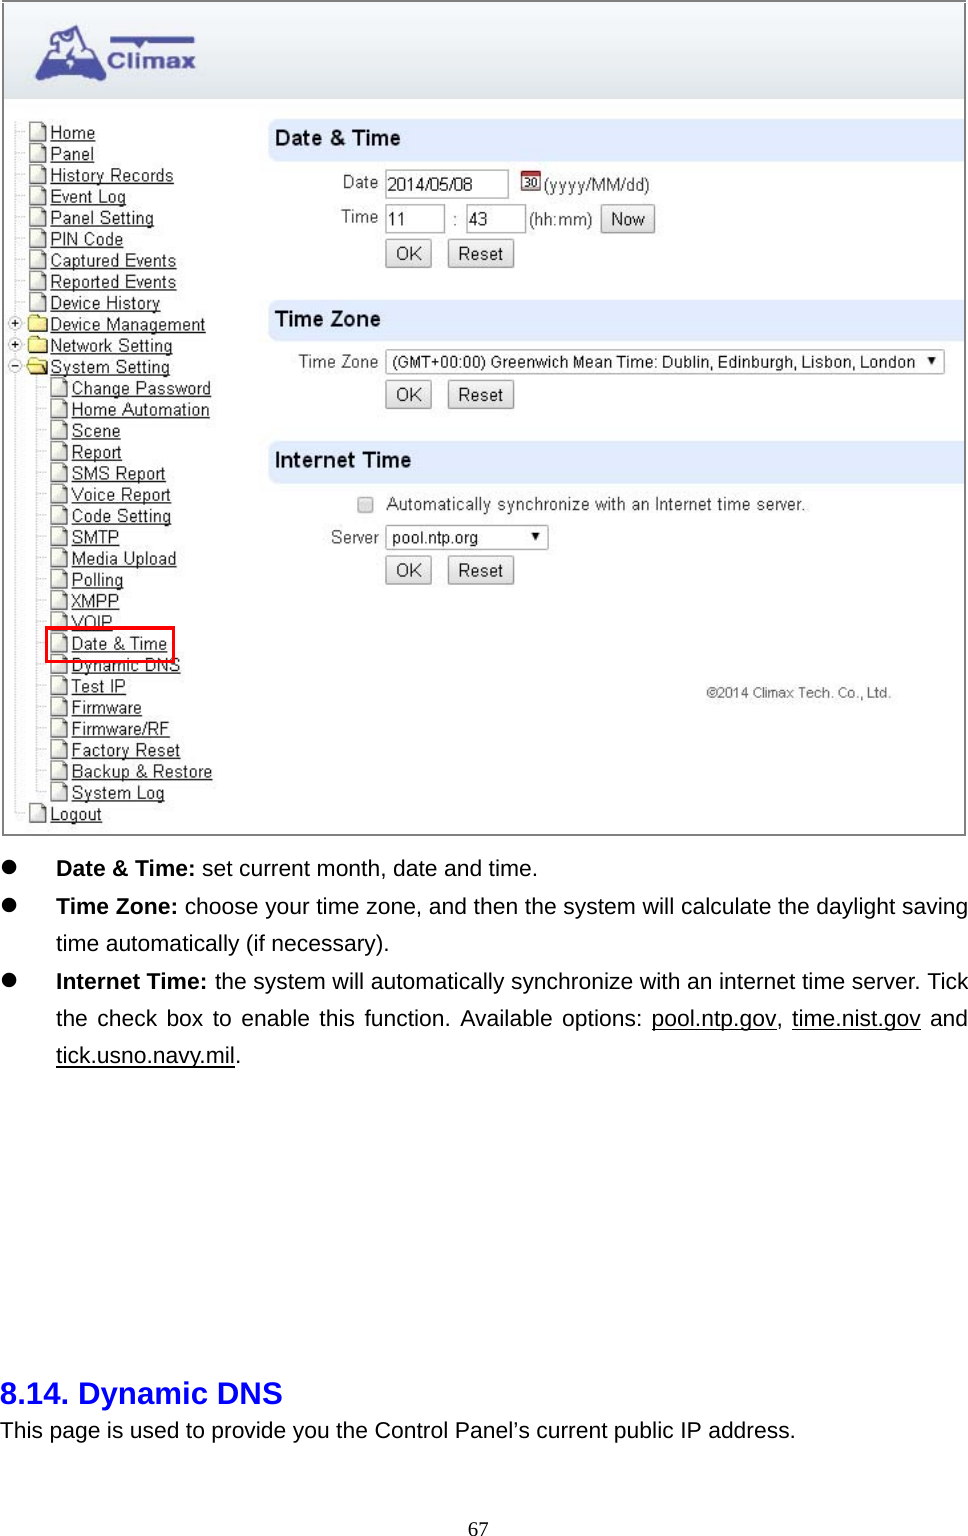  67  Date &amp; Time: set current month, date and time.    Time Zone: choose your time zone, and then the system will calculate the daylight saving time automatically (if necessary).          Internet Time: the system will automatically synchronize with an internet time server. Tick the check box to enable this function. Available options: pool.ntp.gov, time.nist.gov and tick.usno.navy.mil.           8.14. Dynamic DNS   This page is used to provide you the Control Panel’s current public IP address. 